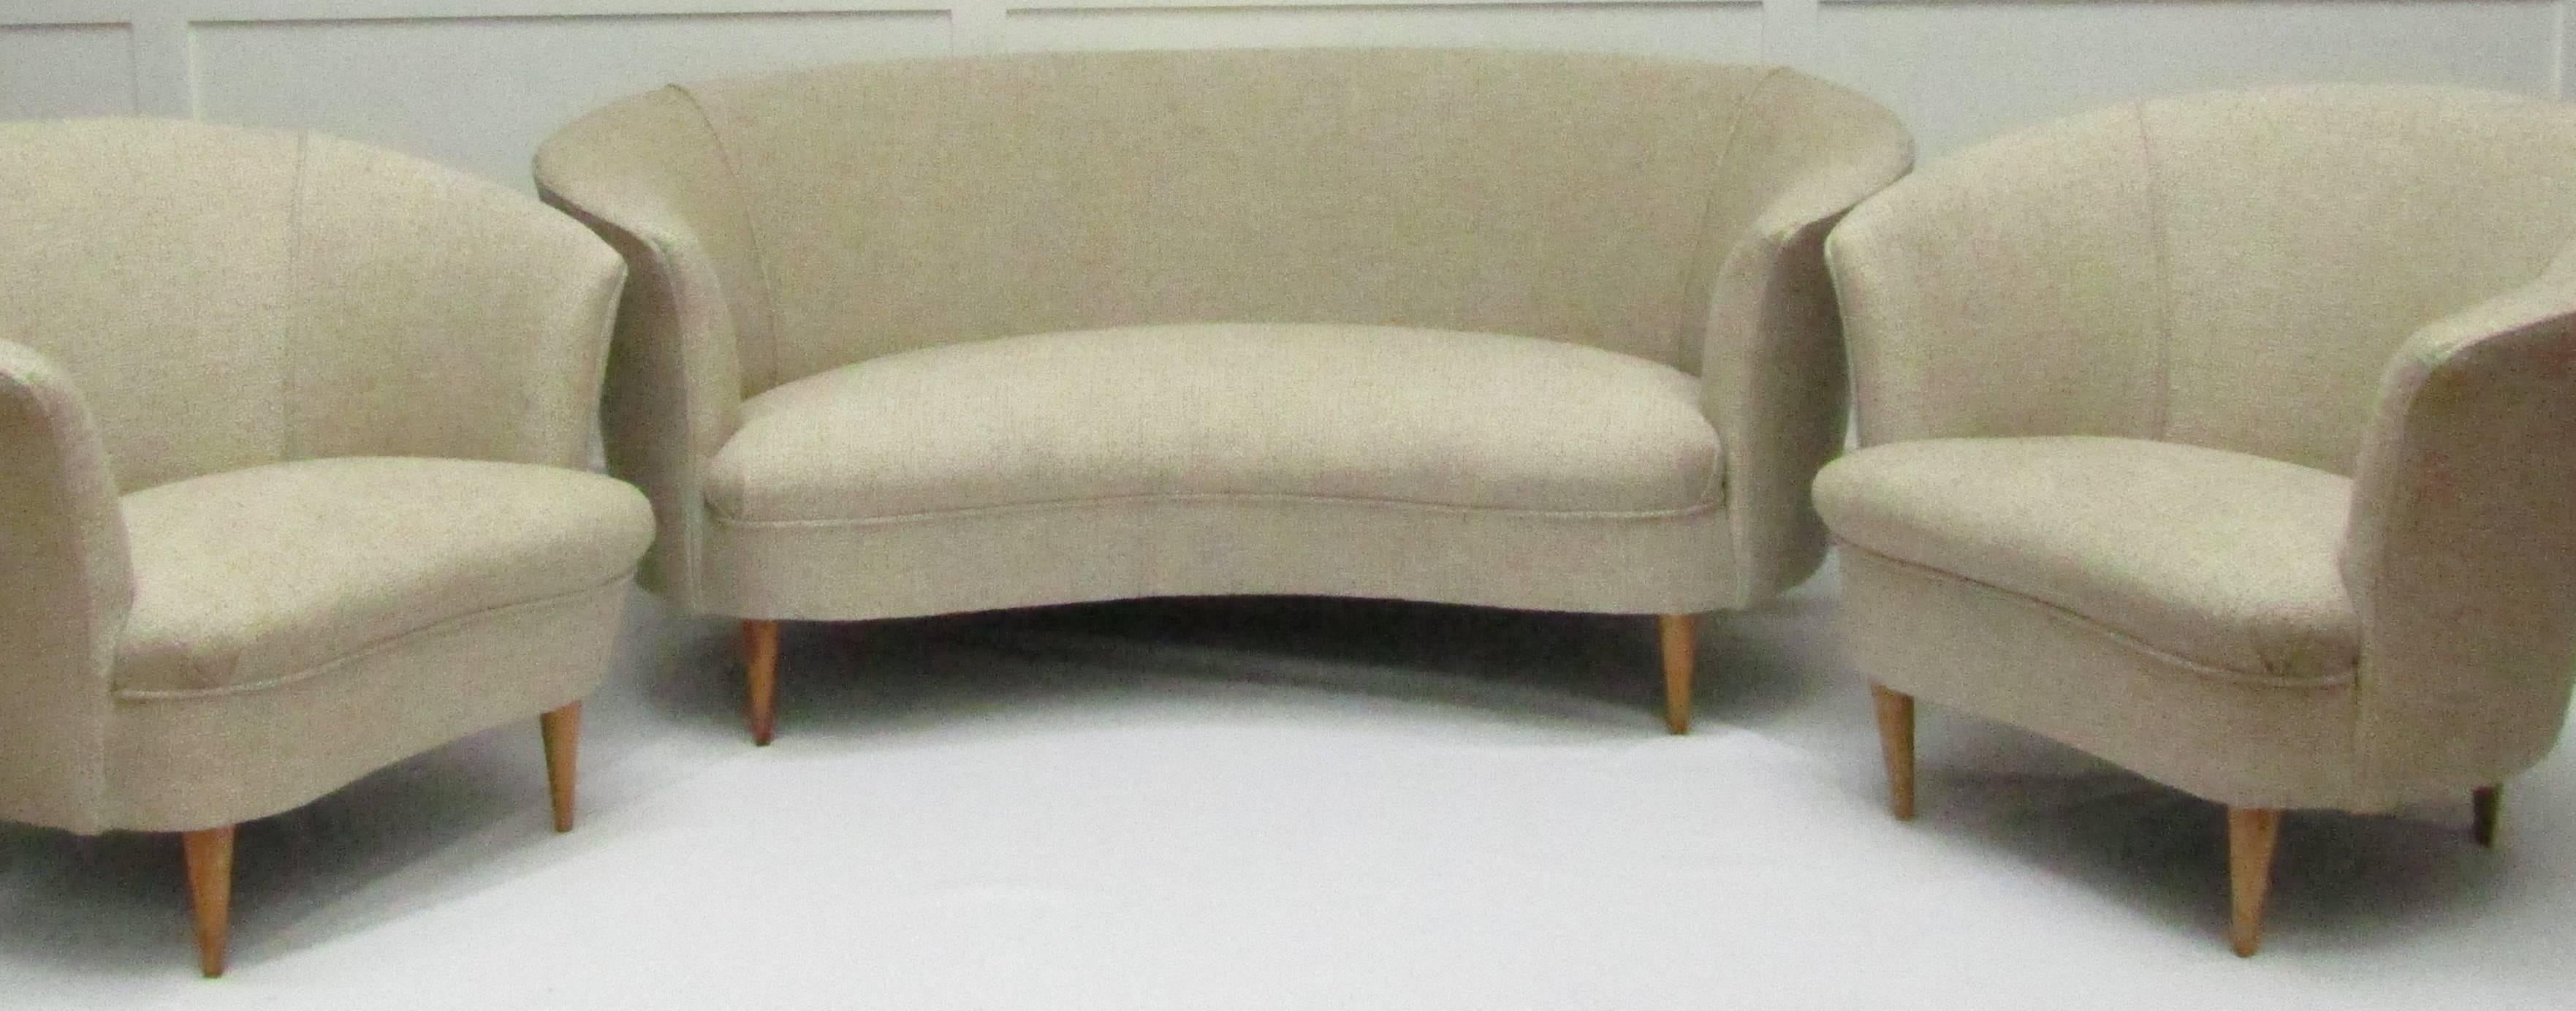 A two-seat curved sofa and a pair of matching armchairs attributed to Ico Parisi
Upholstered in Osborne and Little Antibes fabric.


Measures: Chairs 
Height 27 in / 68.5 cm
width 30 ½ in / 77 cm
depth 27 in / 68.5 cm

Sofa and pair of